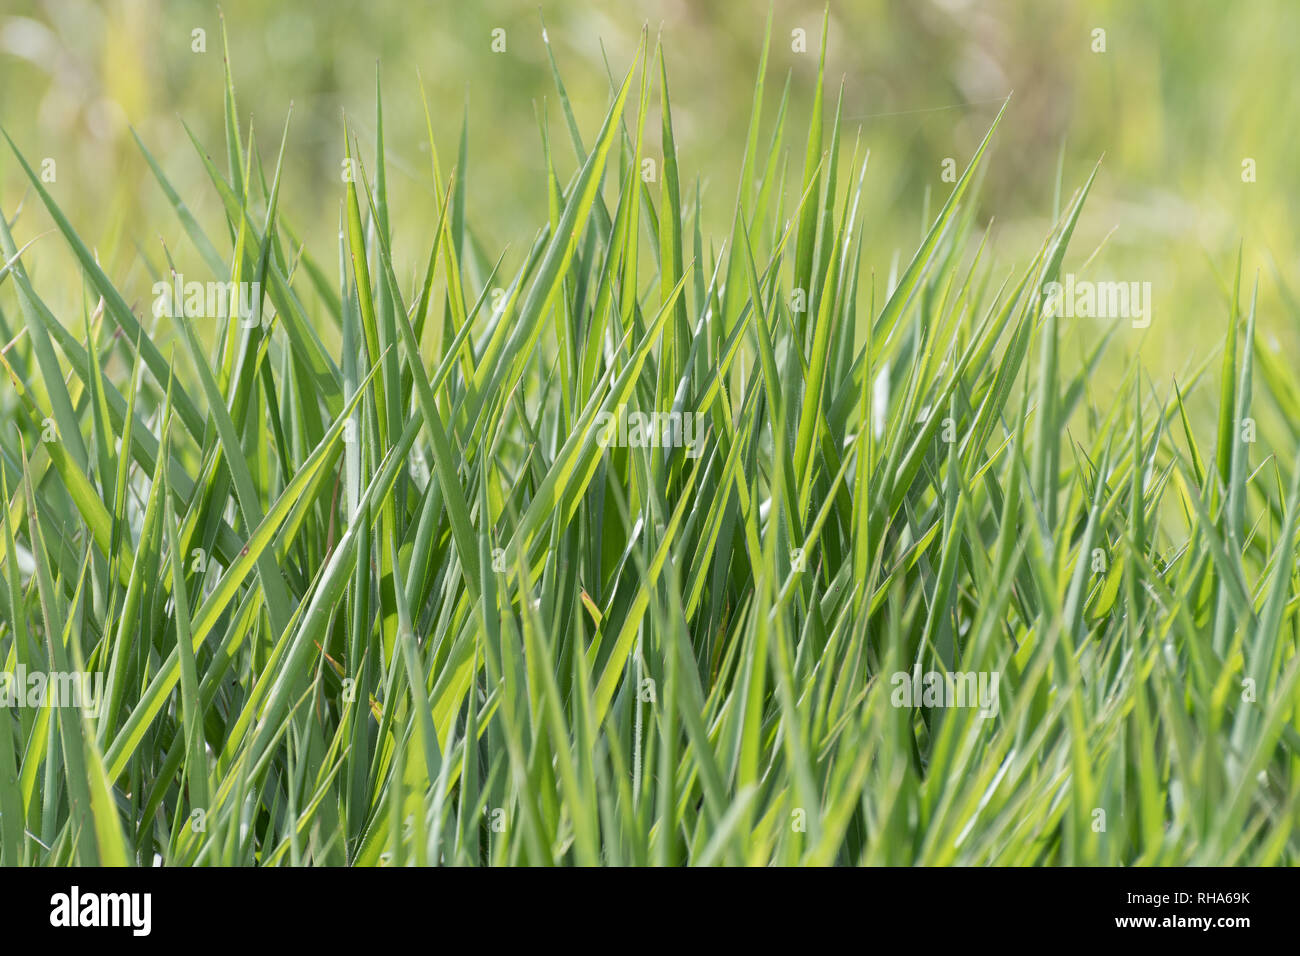 Blades of tall fresh lush healthy green grass growing in a field. Background blurred. Grass only. Isolated. Stock Photo